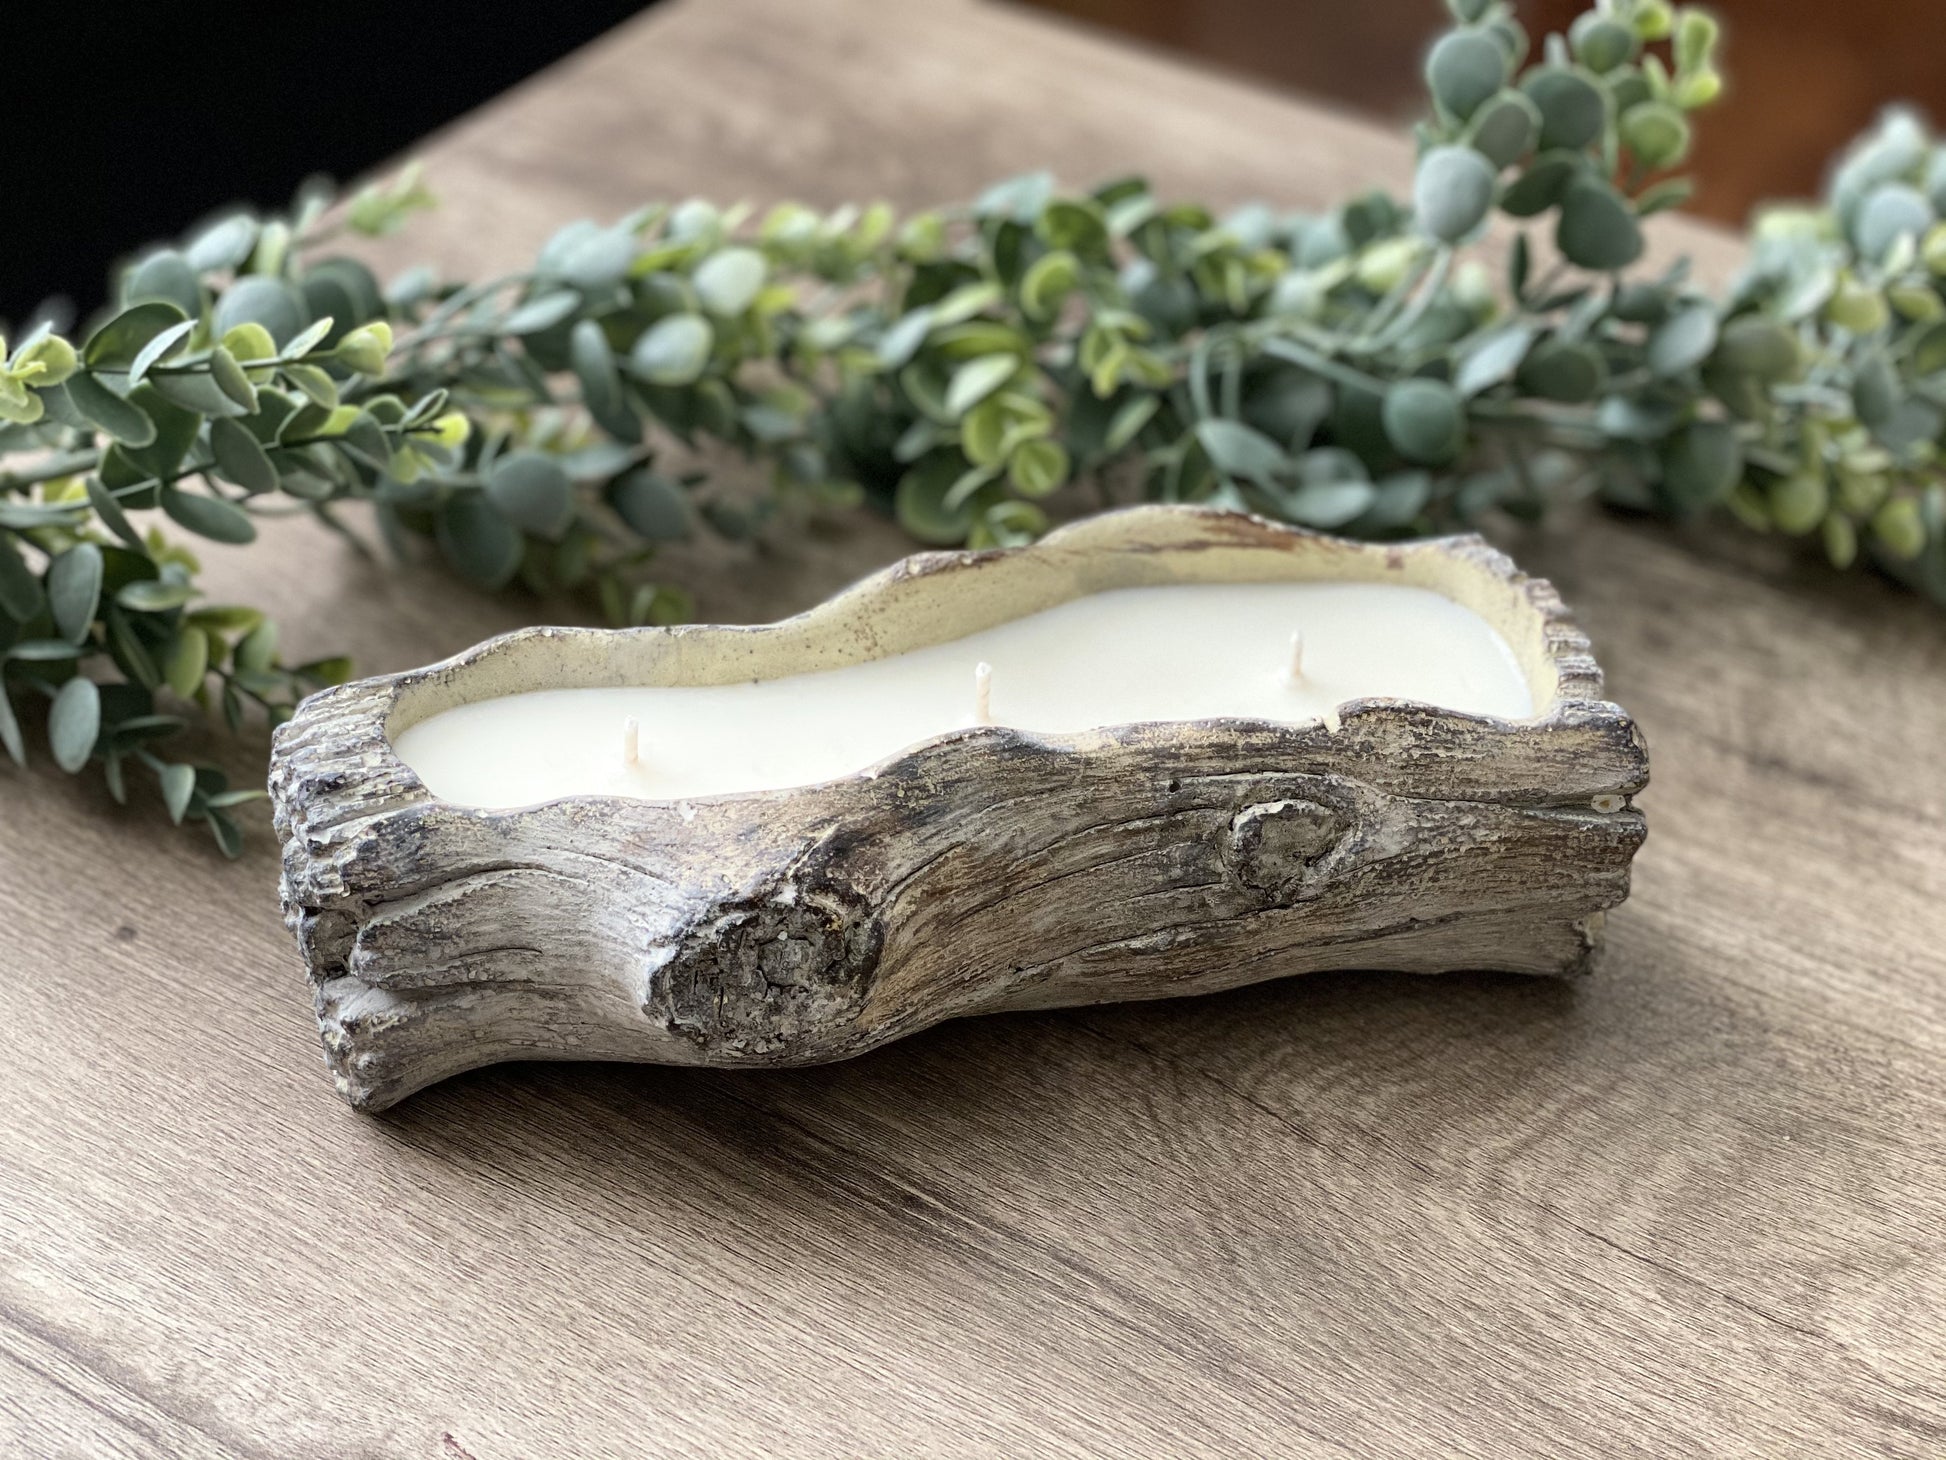 Cement Tree Log Decor Candle | Hilton Head Beach | 12 oz. citrus, oakmoss, violet, A unique piece of home decor that works perfectly for indoor and outdoor space. When you finished the candle, this cement log can be used as planter, serving dish and decorative holder. Bluffton Candles - The Bluffton Shop - Gift Shops